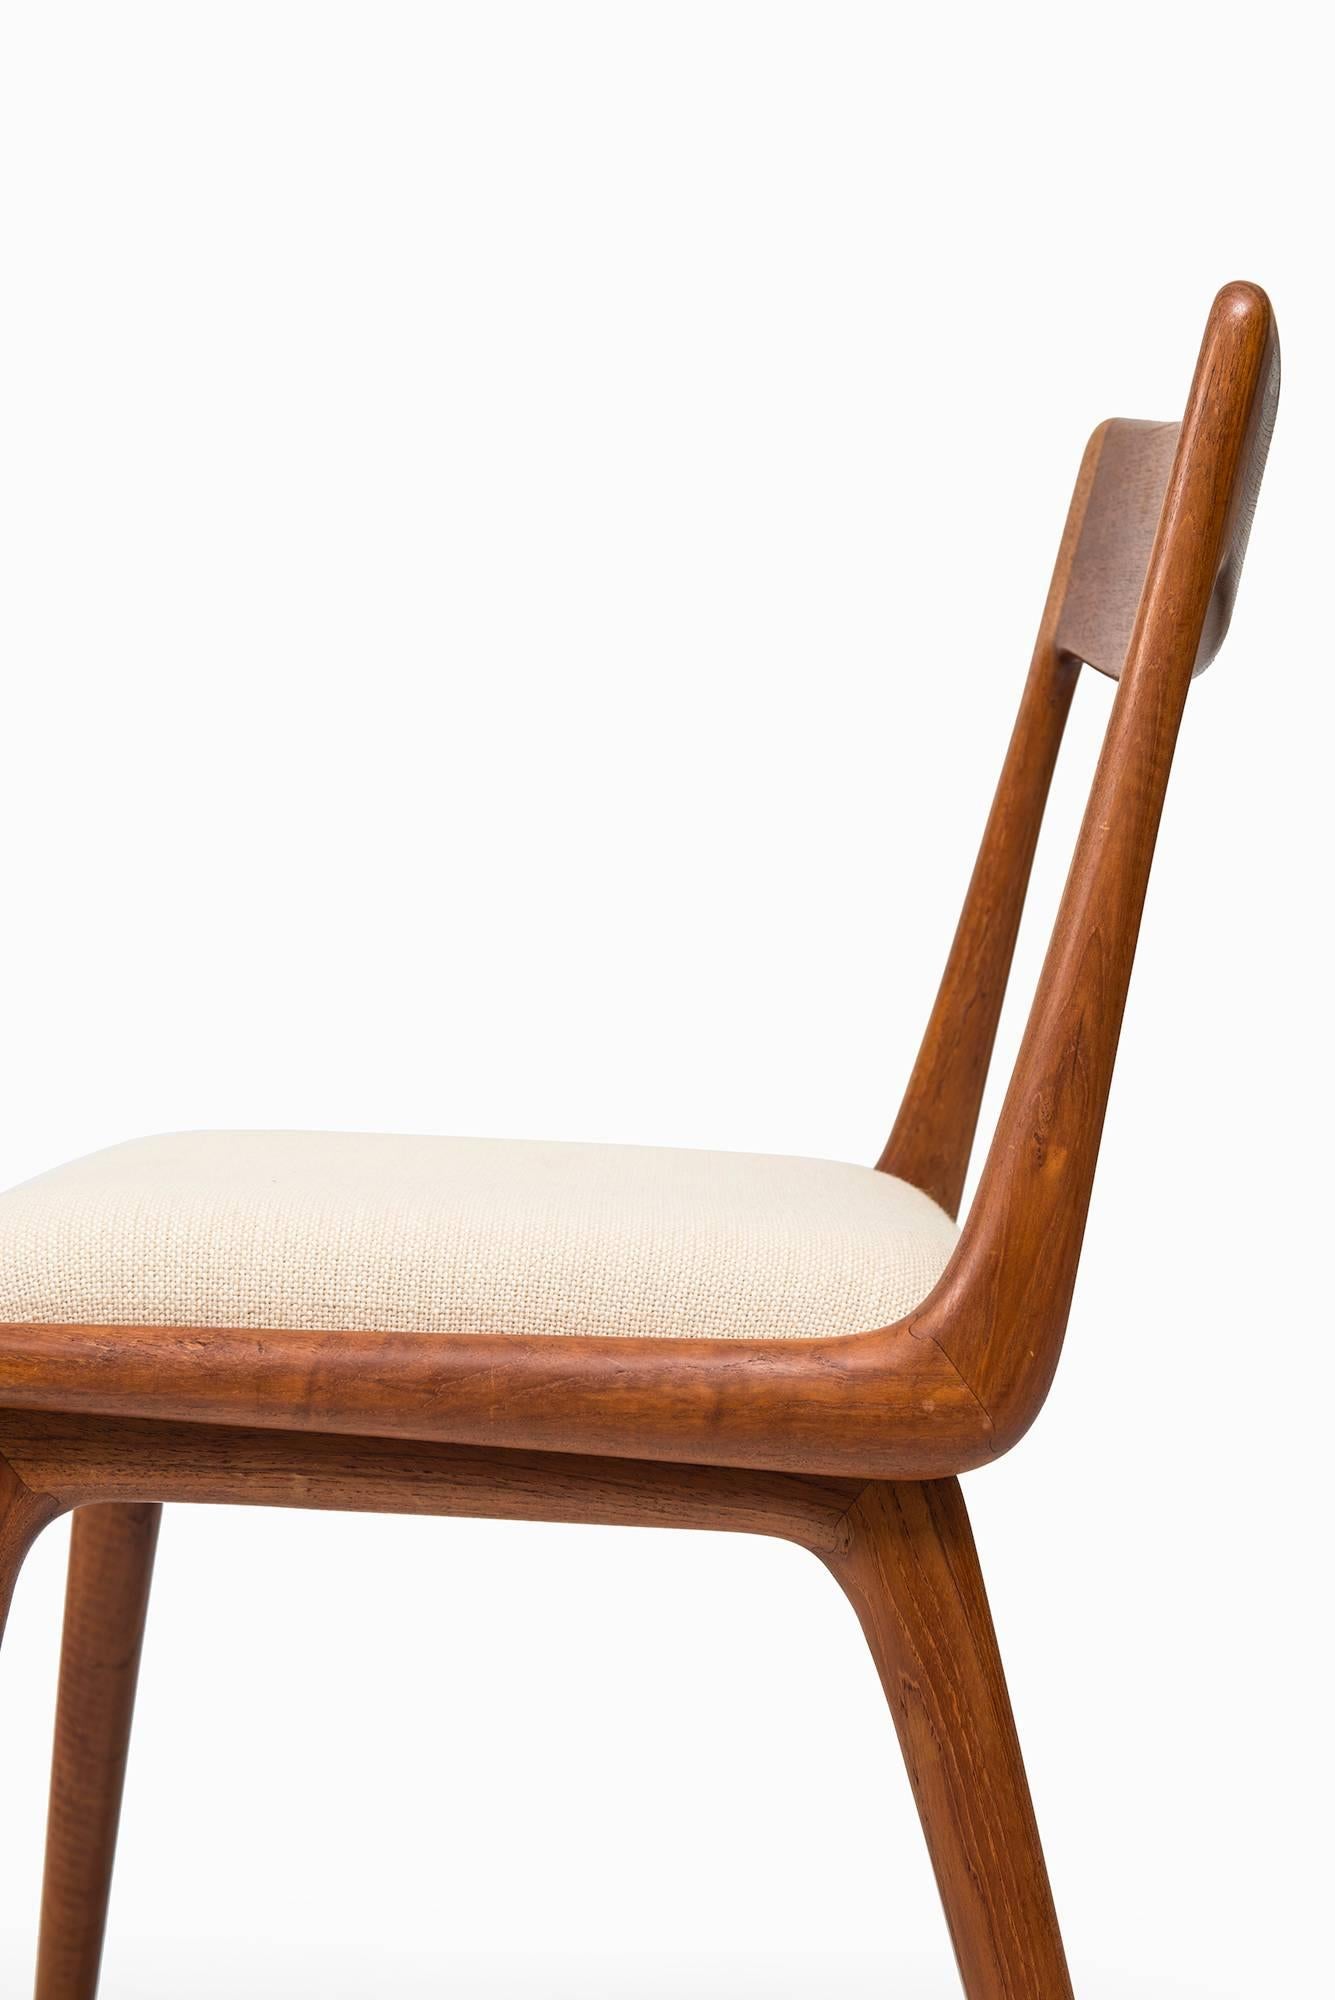 Danish Alfred Christensen Dining Chairs Model Boomerang Produced in Denmark